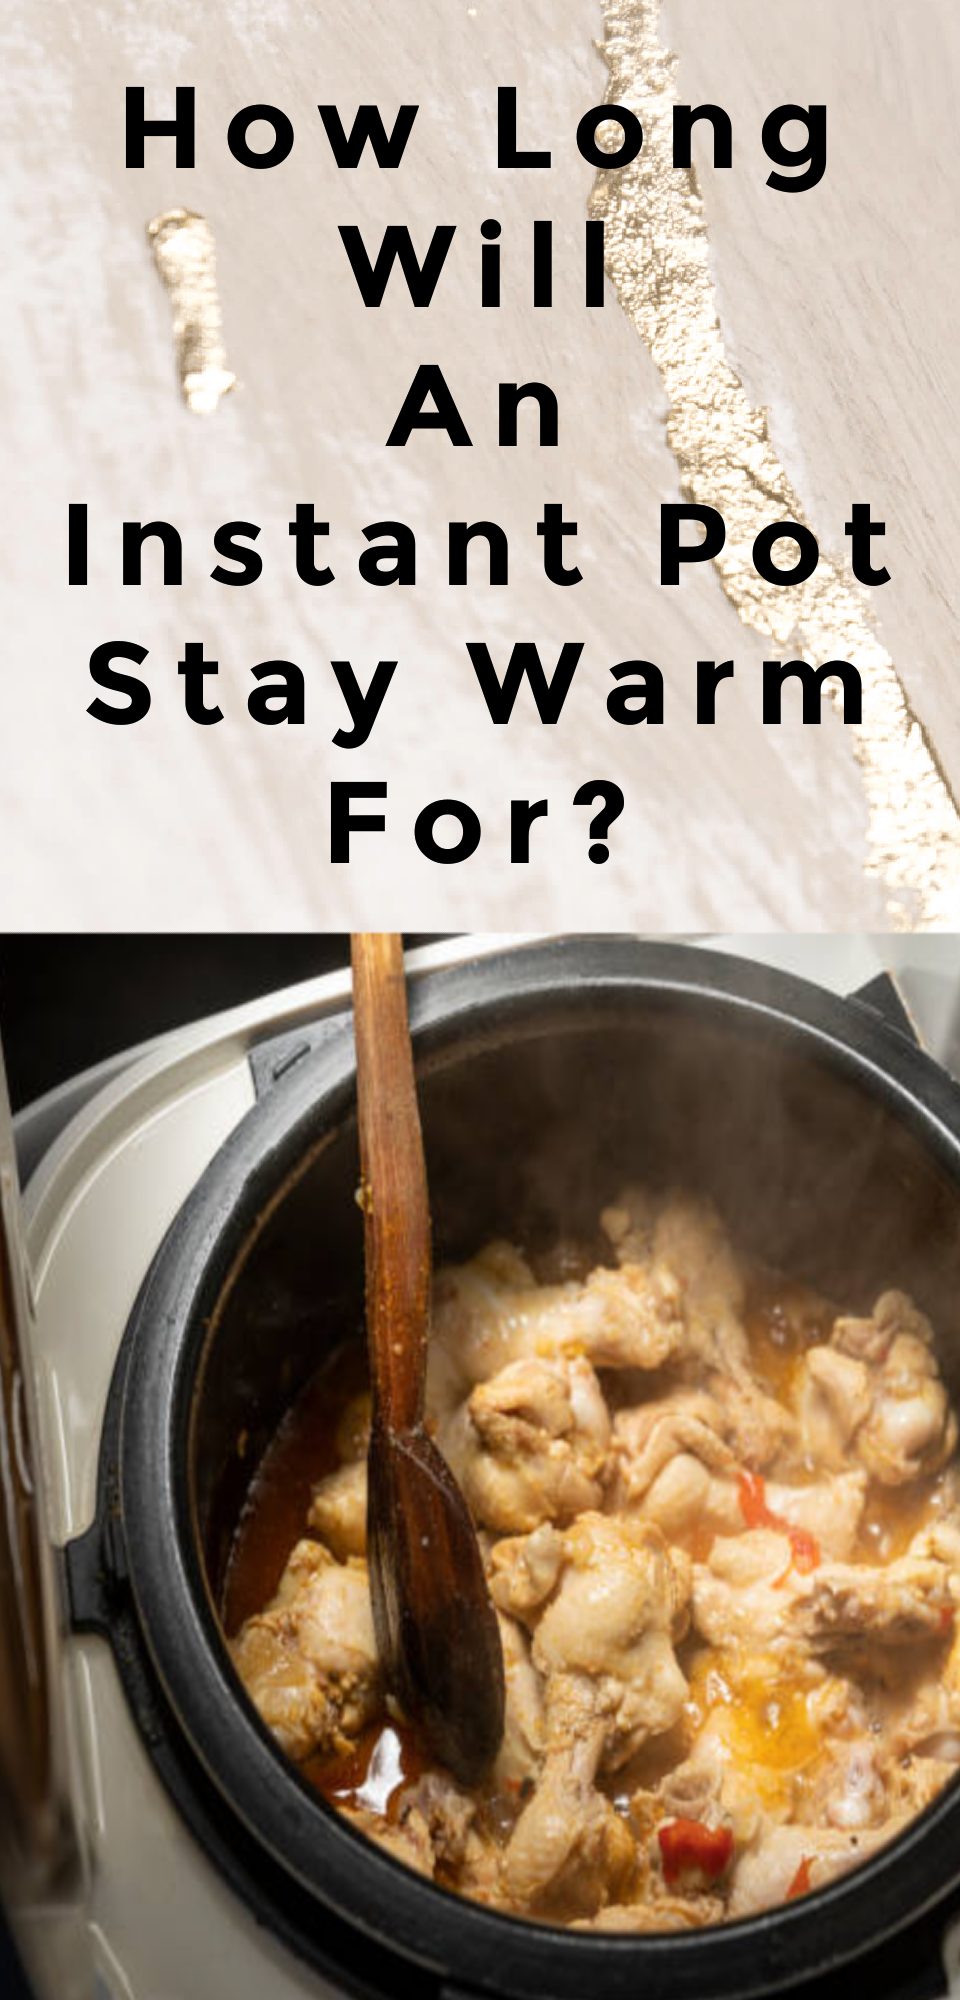 An Instant Pot is a great appliance to own. Not only does it make meal prep faster and easier, but it can also keep your food warm for hours on end. However, how long will an instant pot stay warm for exactly? And is there a way to make it stay warm even longer? Keep reading to find out!